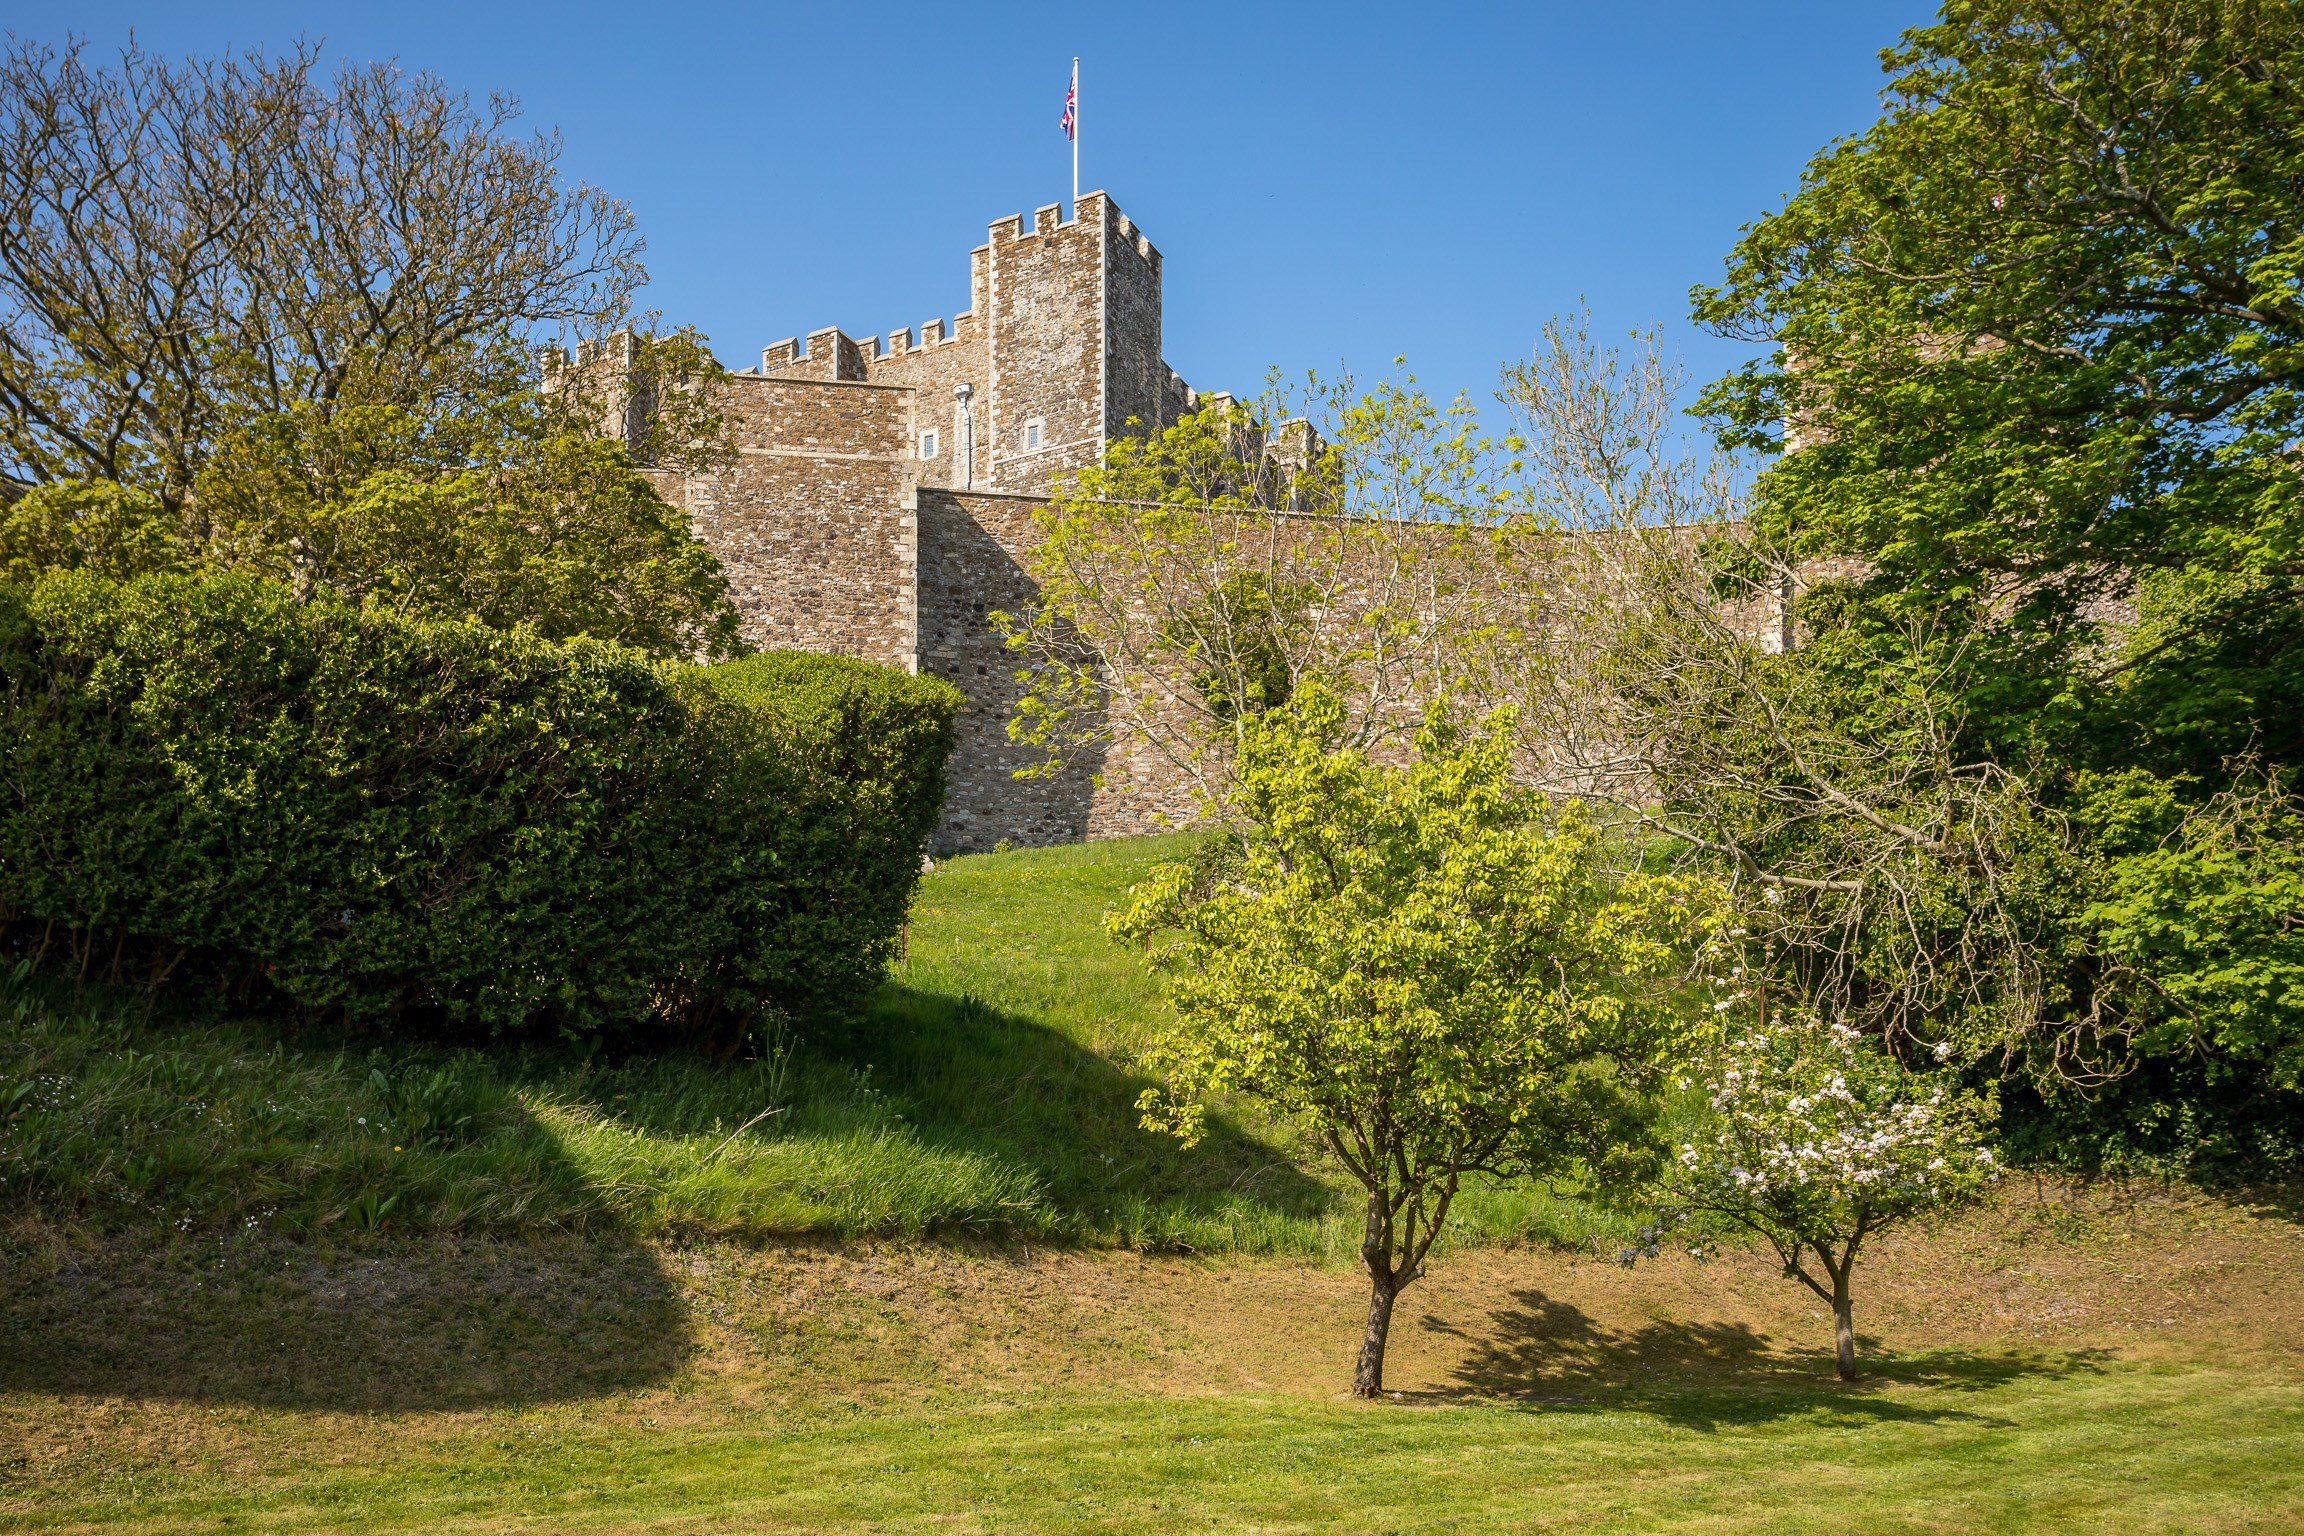 Private garden and view of the castle